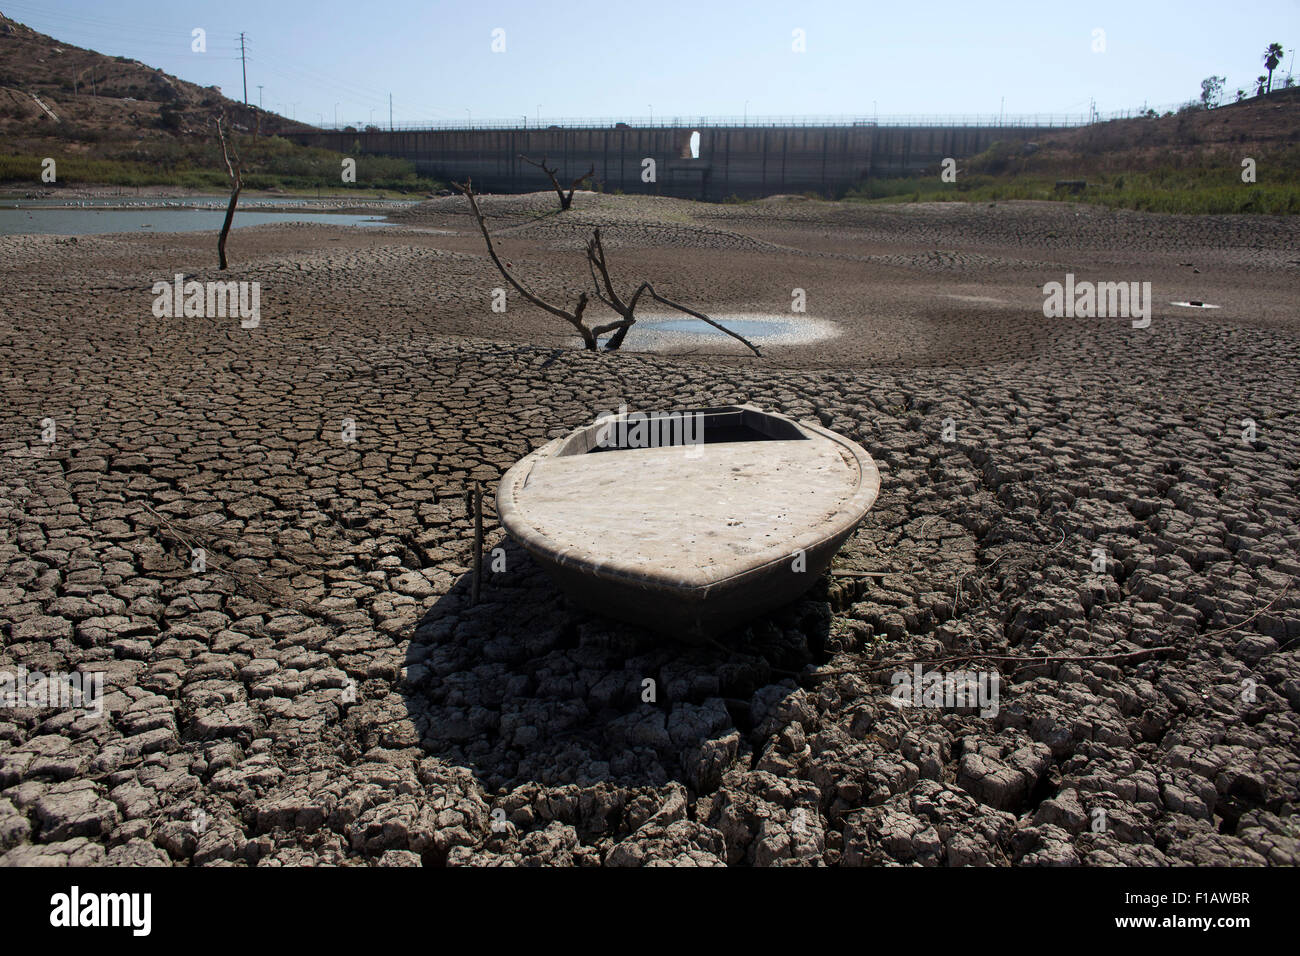 Ensenada. 28th Aug, 2015. Image taken on Aug. 28, 2015 shows the riverbed at the Emiliano Lopez Zamora Dam in Ensenada Municipality, northwest Mexico. The country's Baja California State, in particular the municipalities of Tijuana, Playas de Rosario and Ensenada, witnessed a severe drought. © Guillermo Arias/Xinhua/Alamy Live News Stock Photo